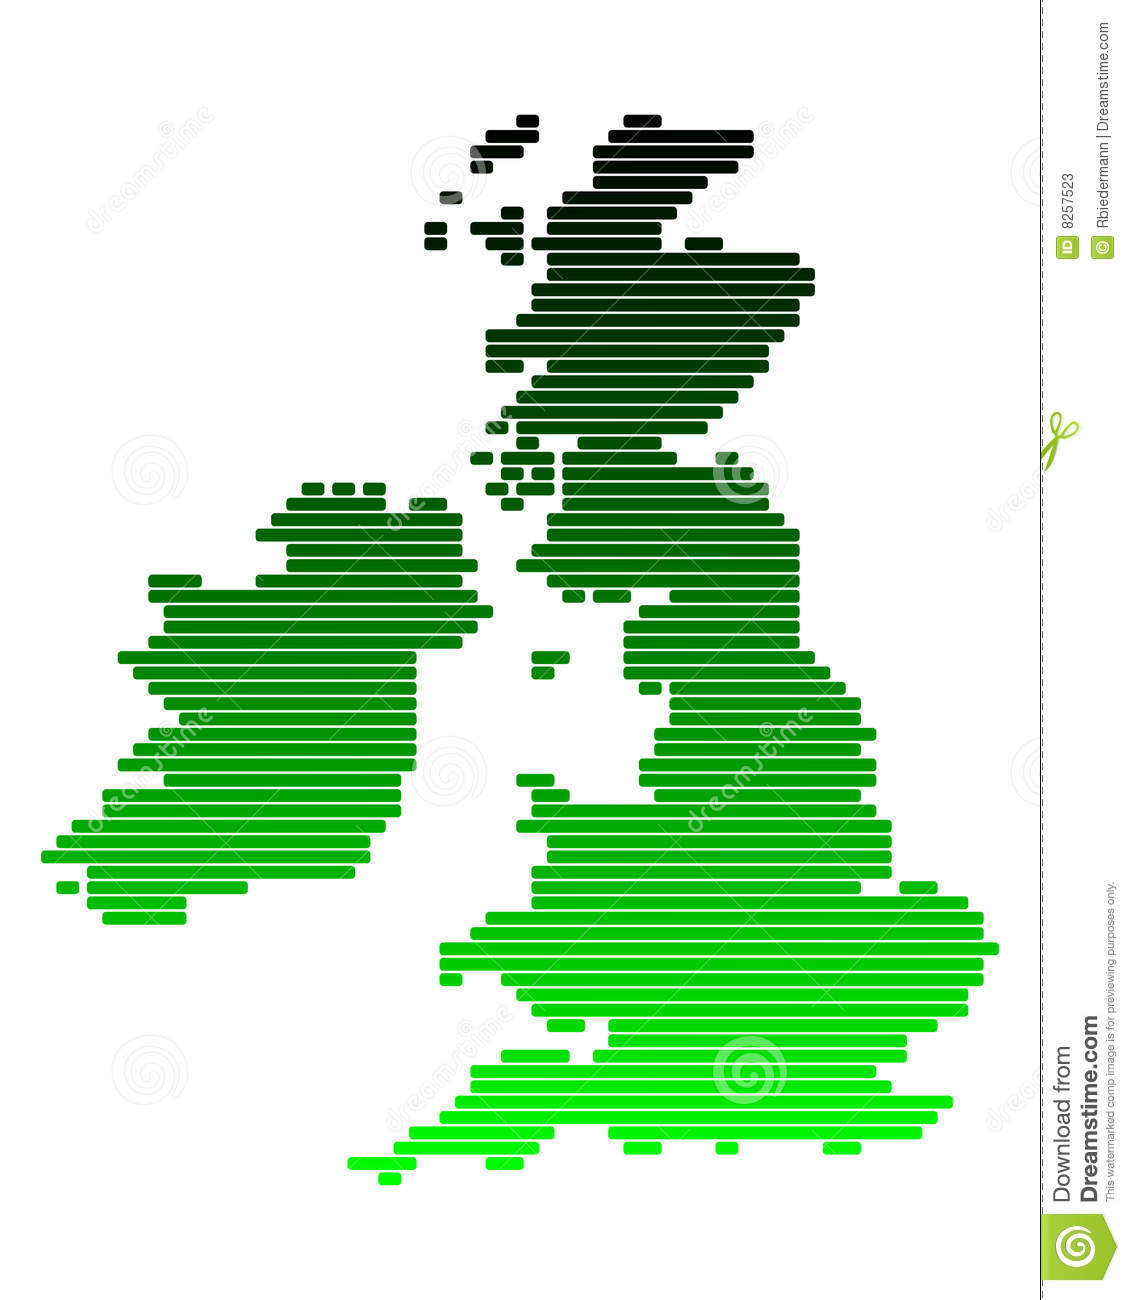 Map Of The British Isles Stock Photos   Image  8257523